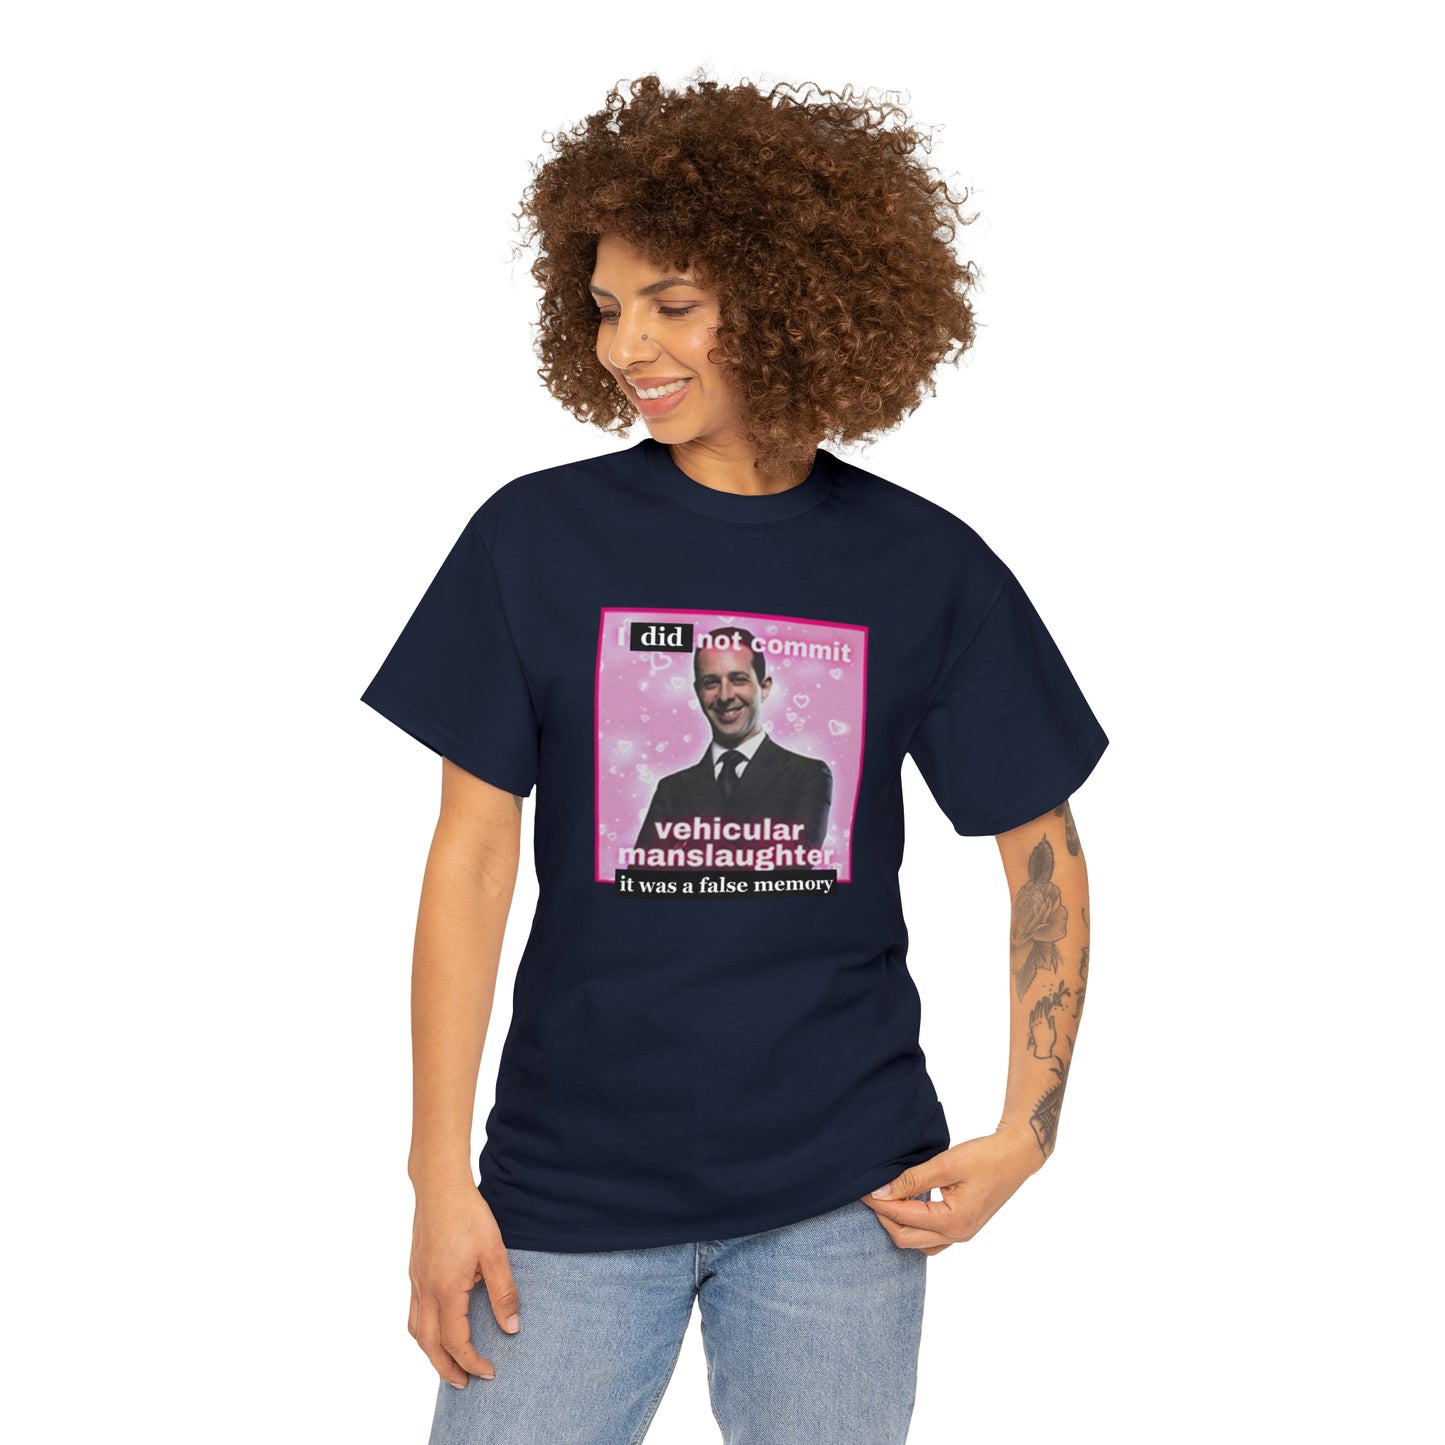 I did not commit vehicular manslaughter it was a false memory kendall roy - Unisex Heavy Cotton Tee